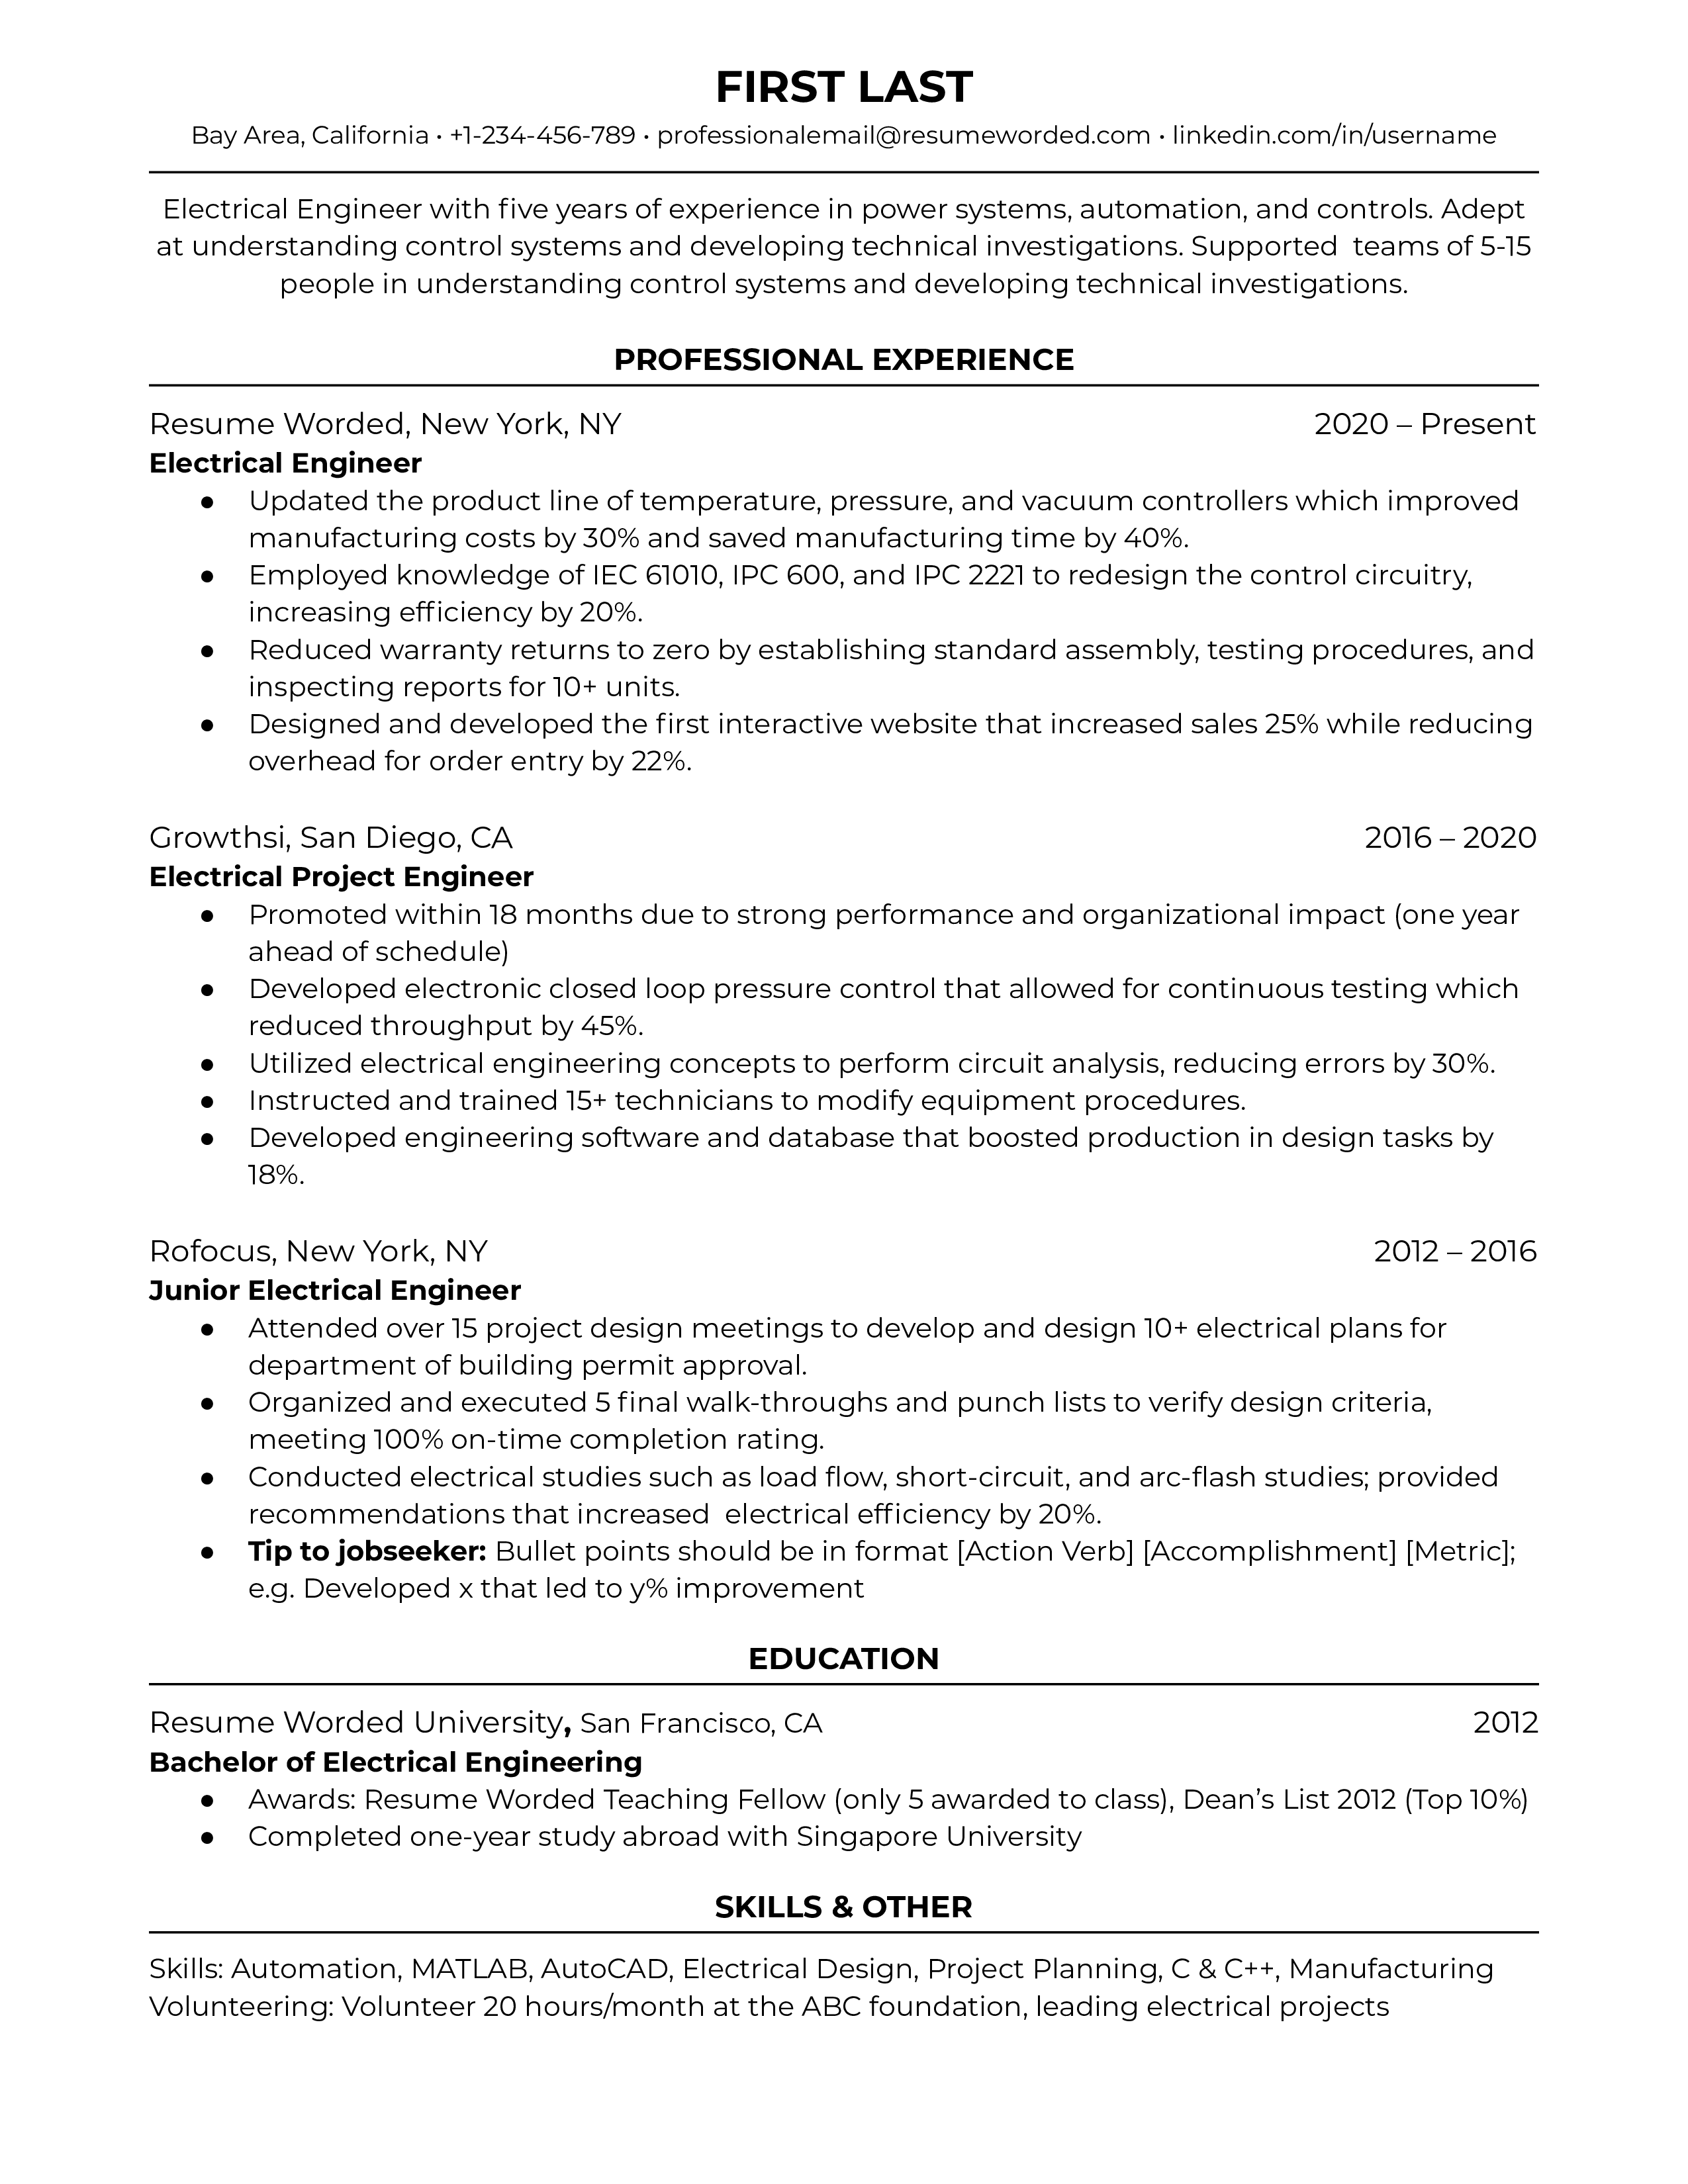 A CV for an electrical engineer job demonstrating technical skills and quantified achievements.